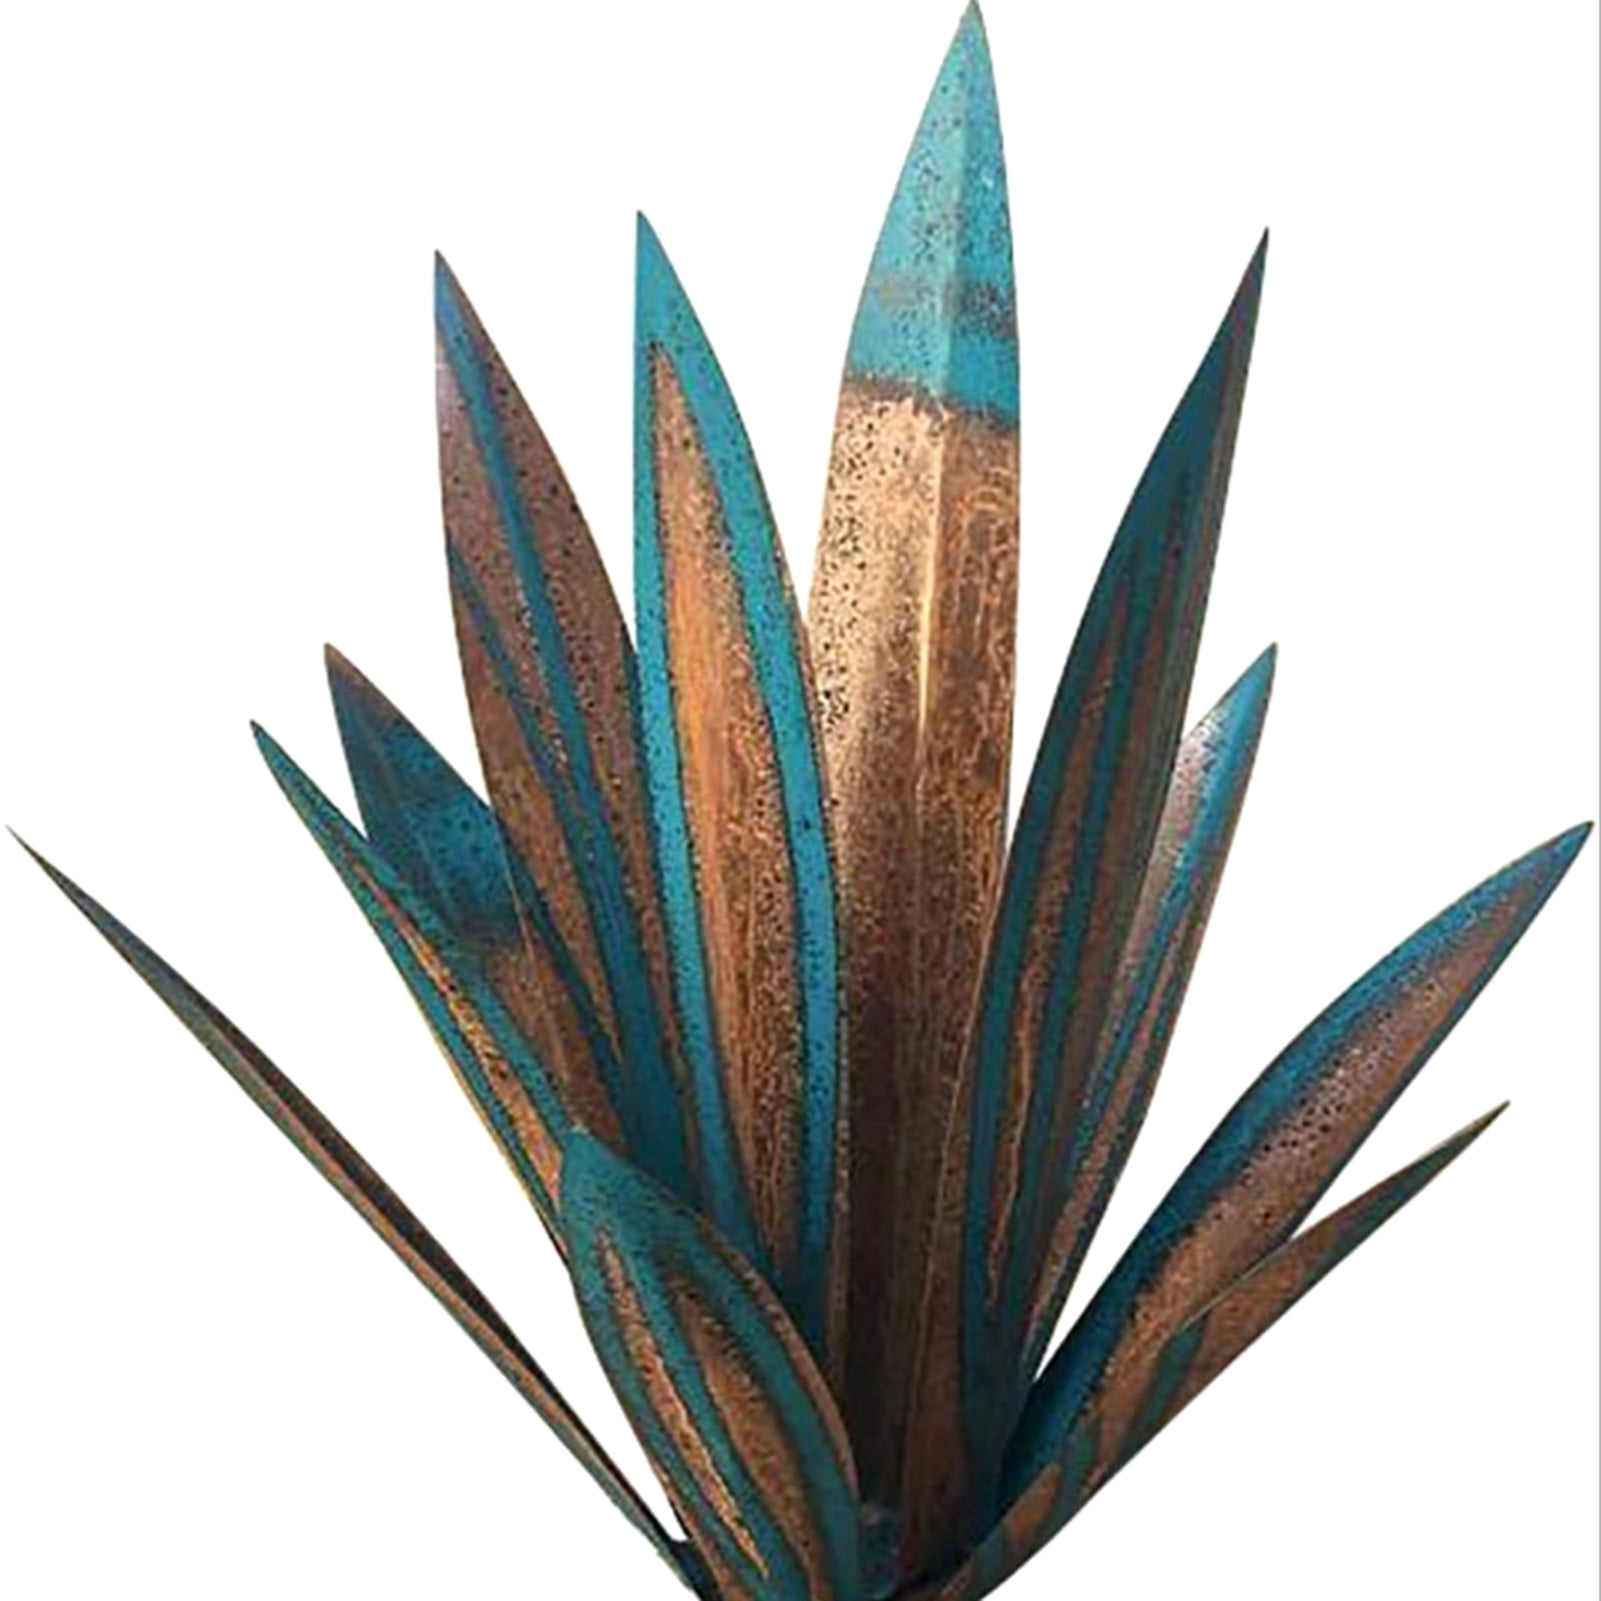 25.59in Tequila Rustic Sculpture,Rustic Hand Painted Metal Agave,DIY Easter Decor Metal Agave Plant Garden Yard Art Sculpture Lawn Home Ornaments,for Yard Stakes,Garden Figurines,Outdoor Patio